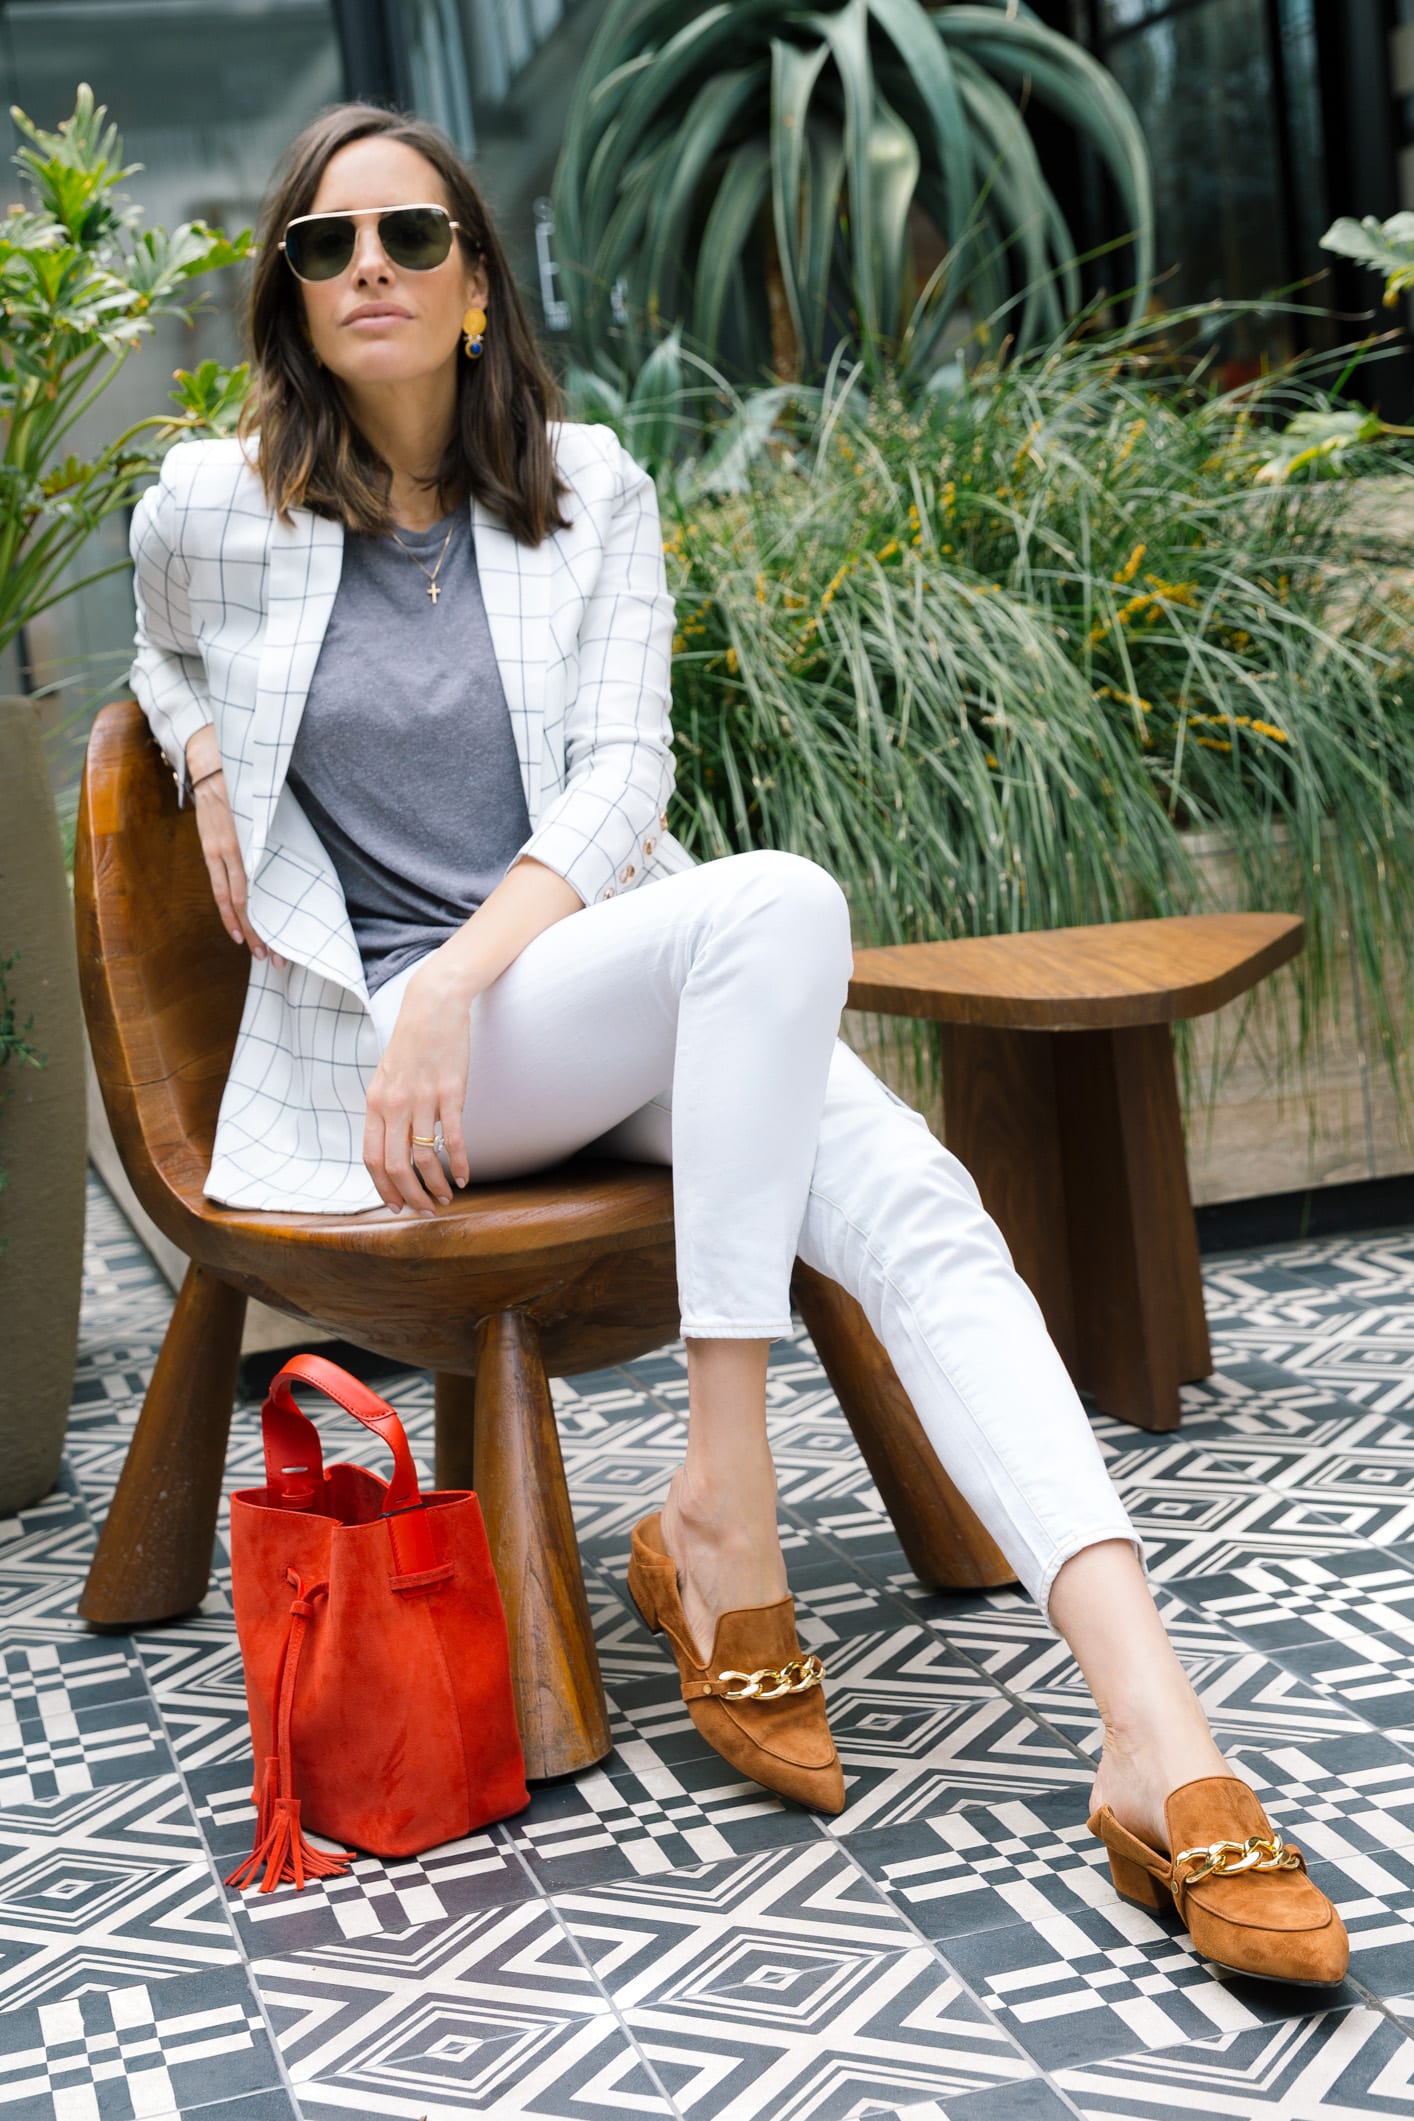 Louise Roe Wearing Spring Wardrobe Staples Chriselle Lim Blazer White Jeans And Flats